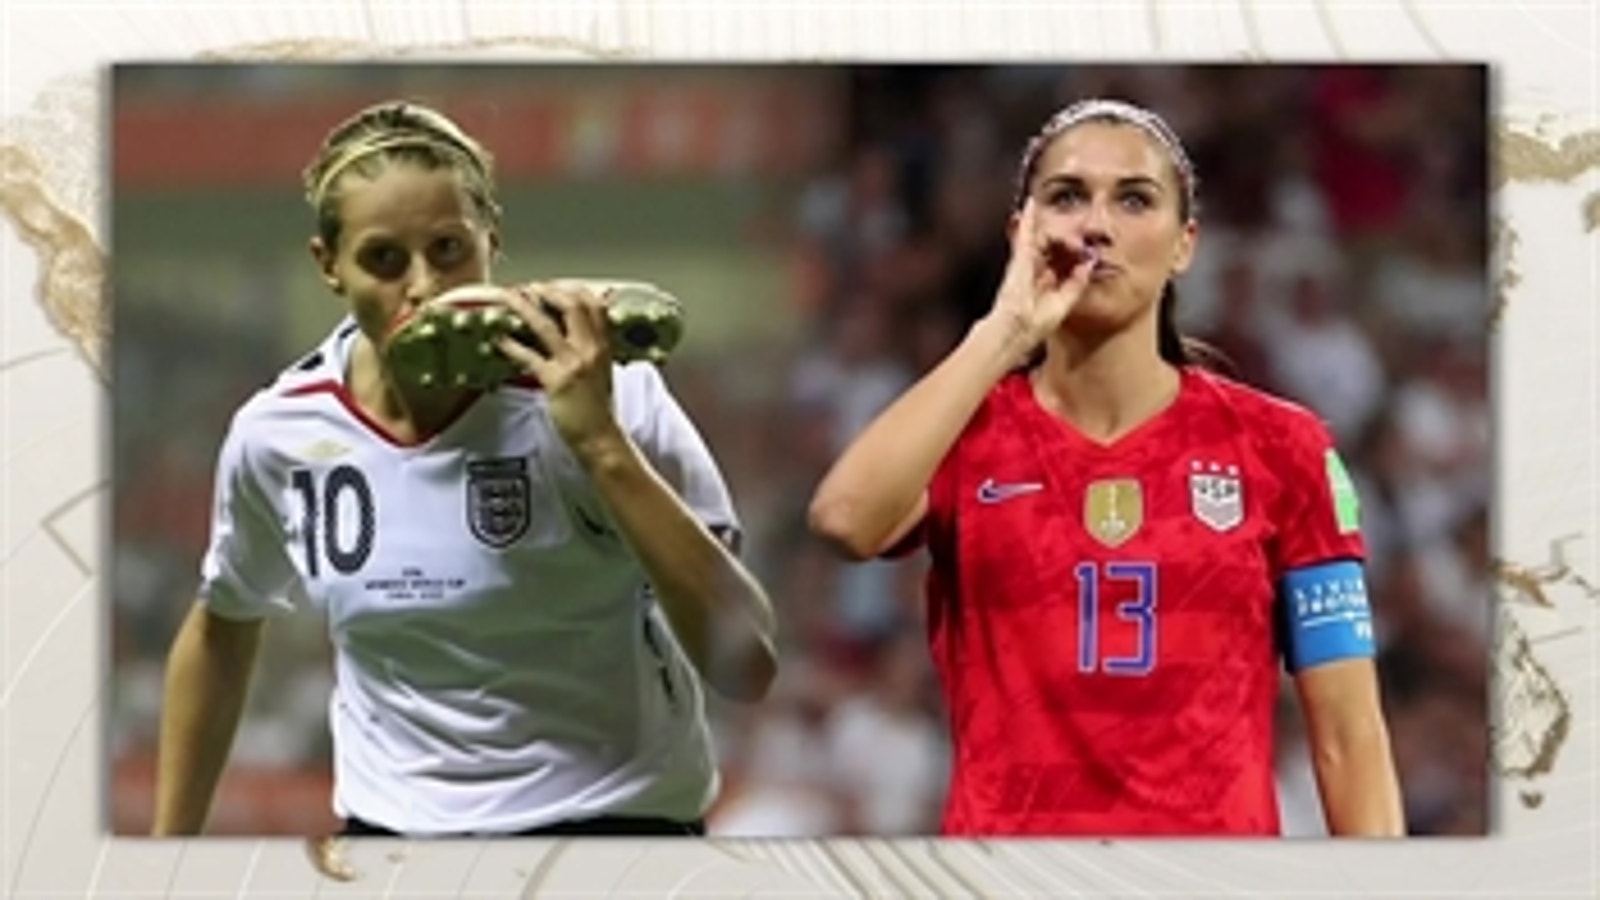 England's Kelly Smith on Alex Morgan tea celebration: 'It was fun ... maybe she can have tea with the Queen'